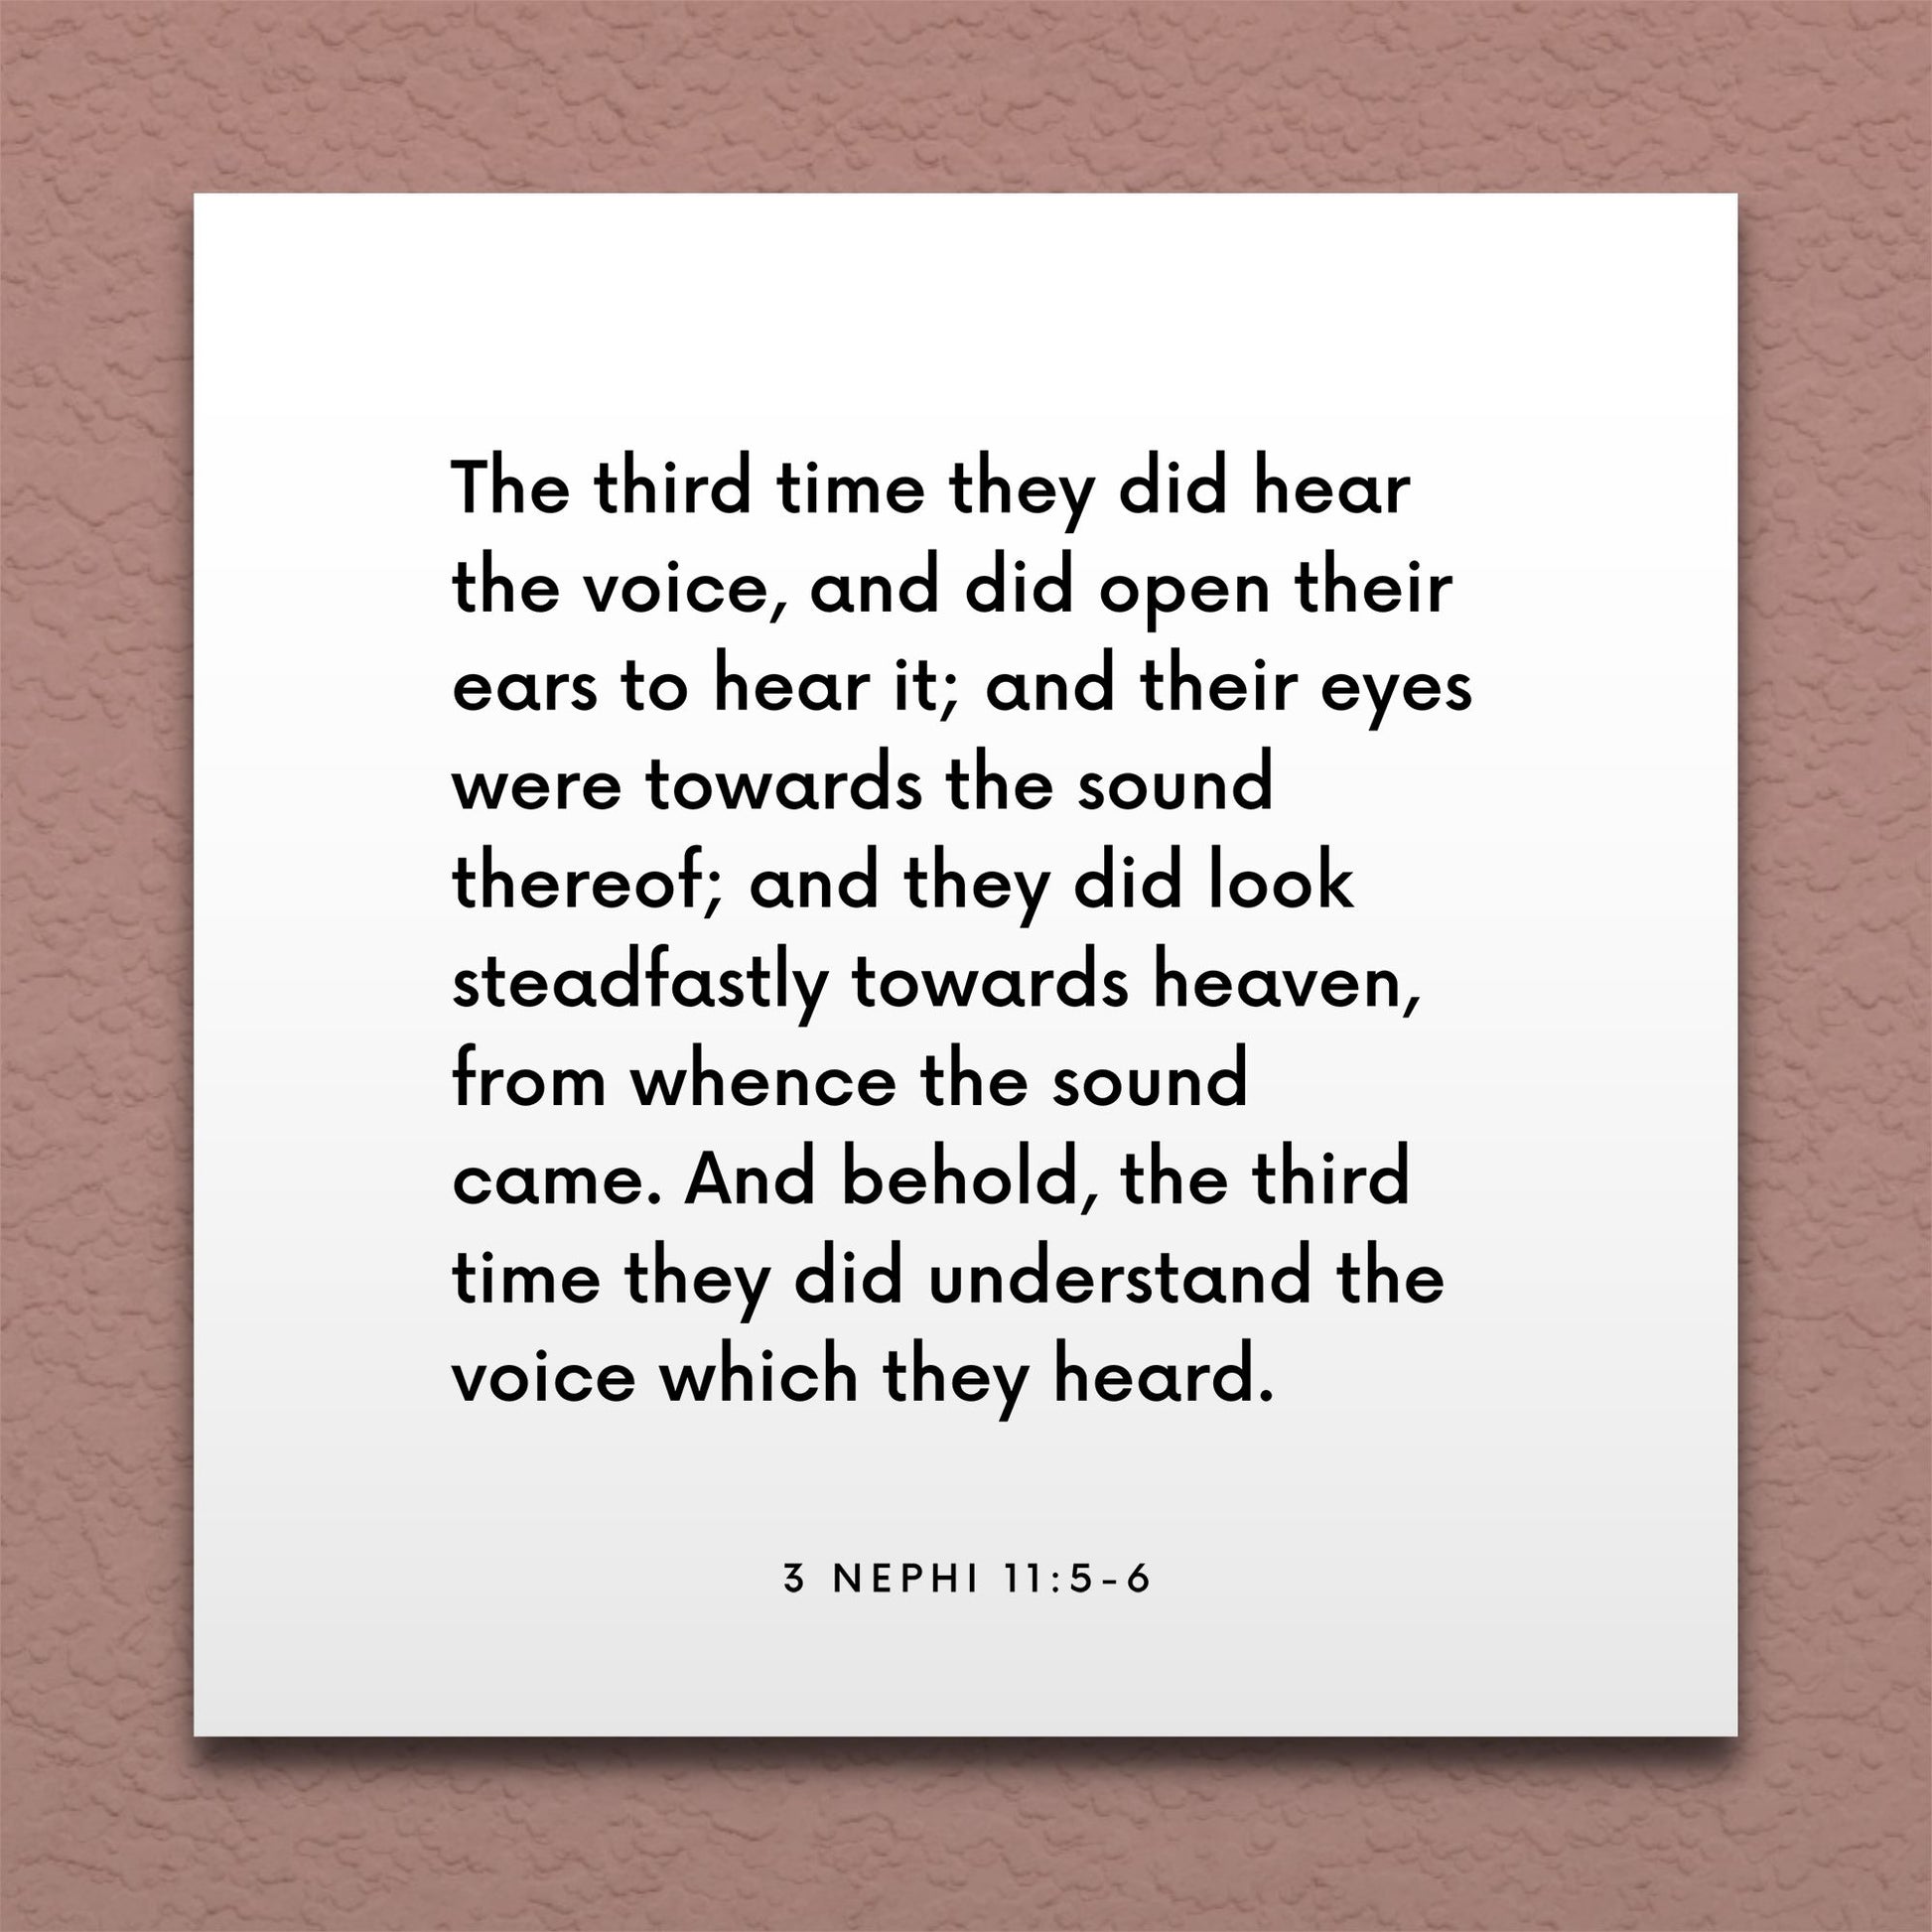 Wall-mounted scripture tile for 3 Nephi 11:5-6 - "They did understand the voice which they heard"